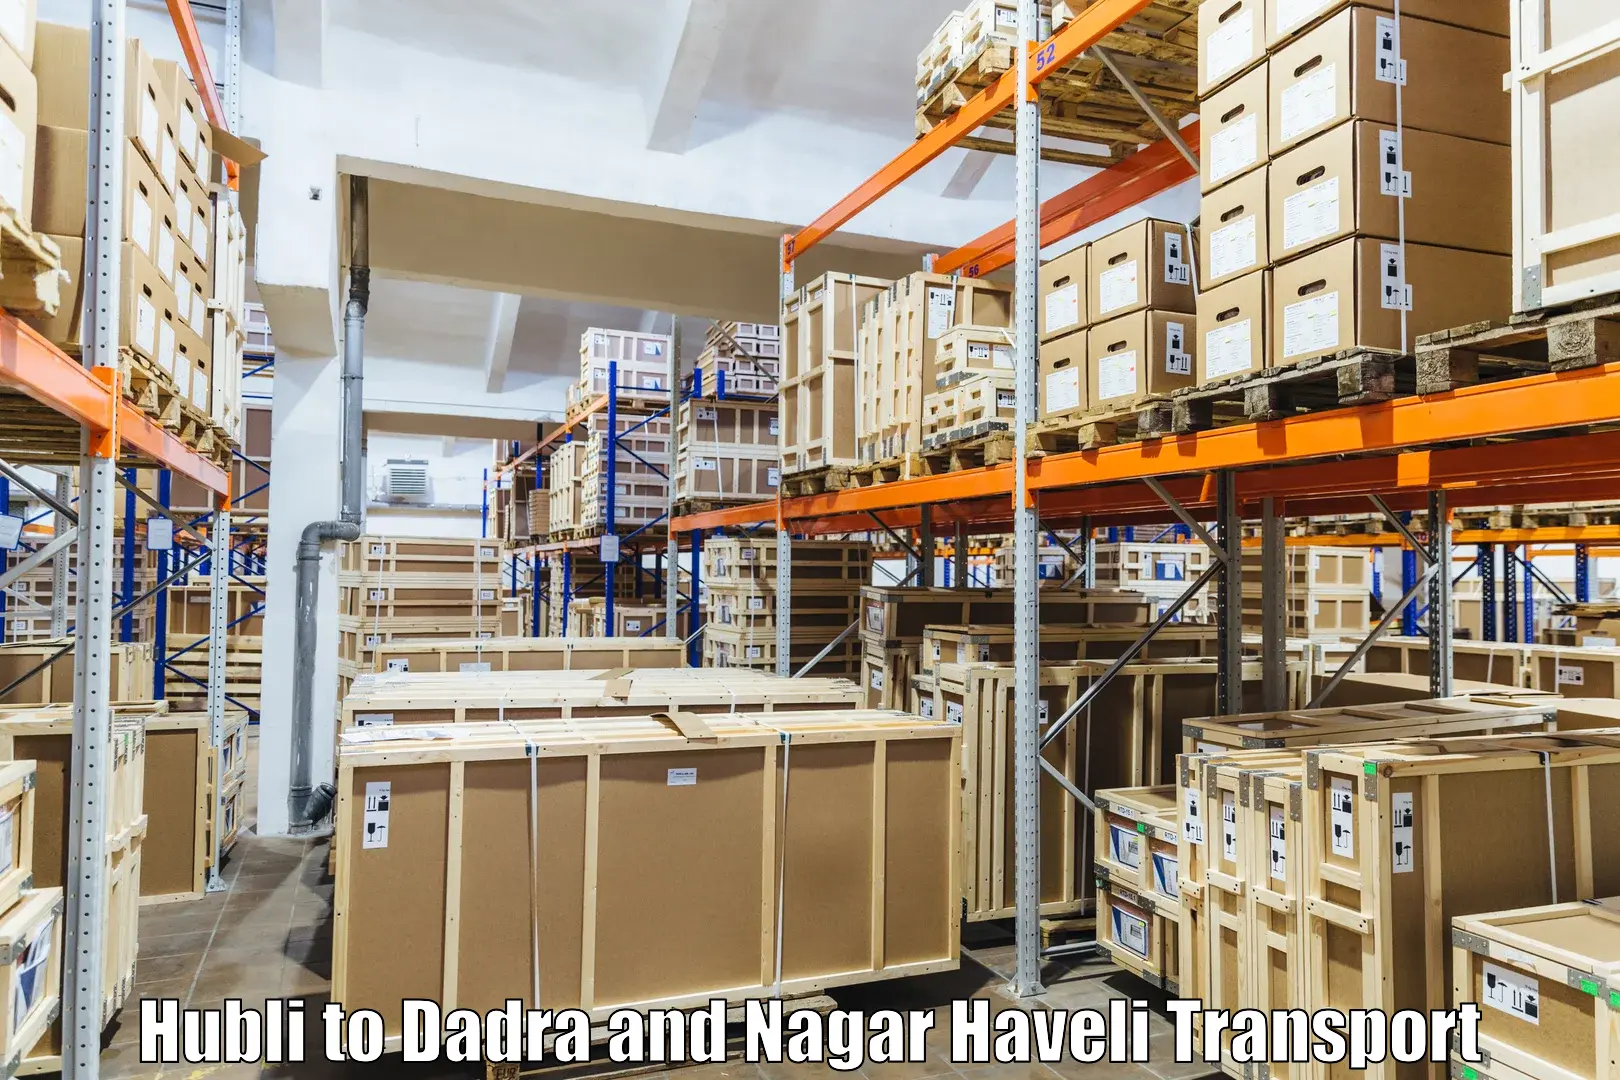 Daily parcel service transport in Hubli to Dadra and Nagar Haveli